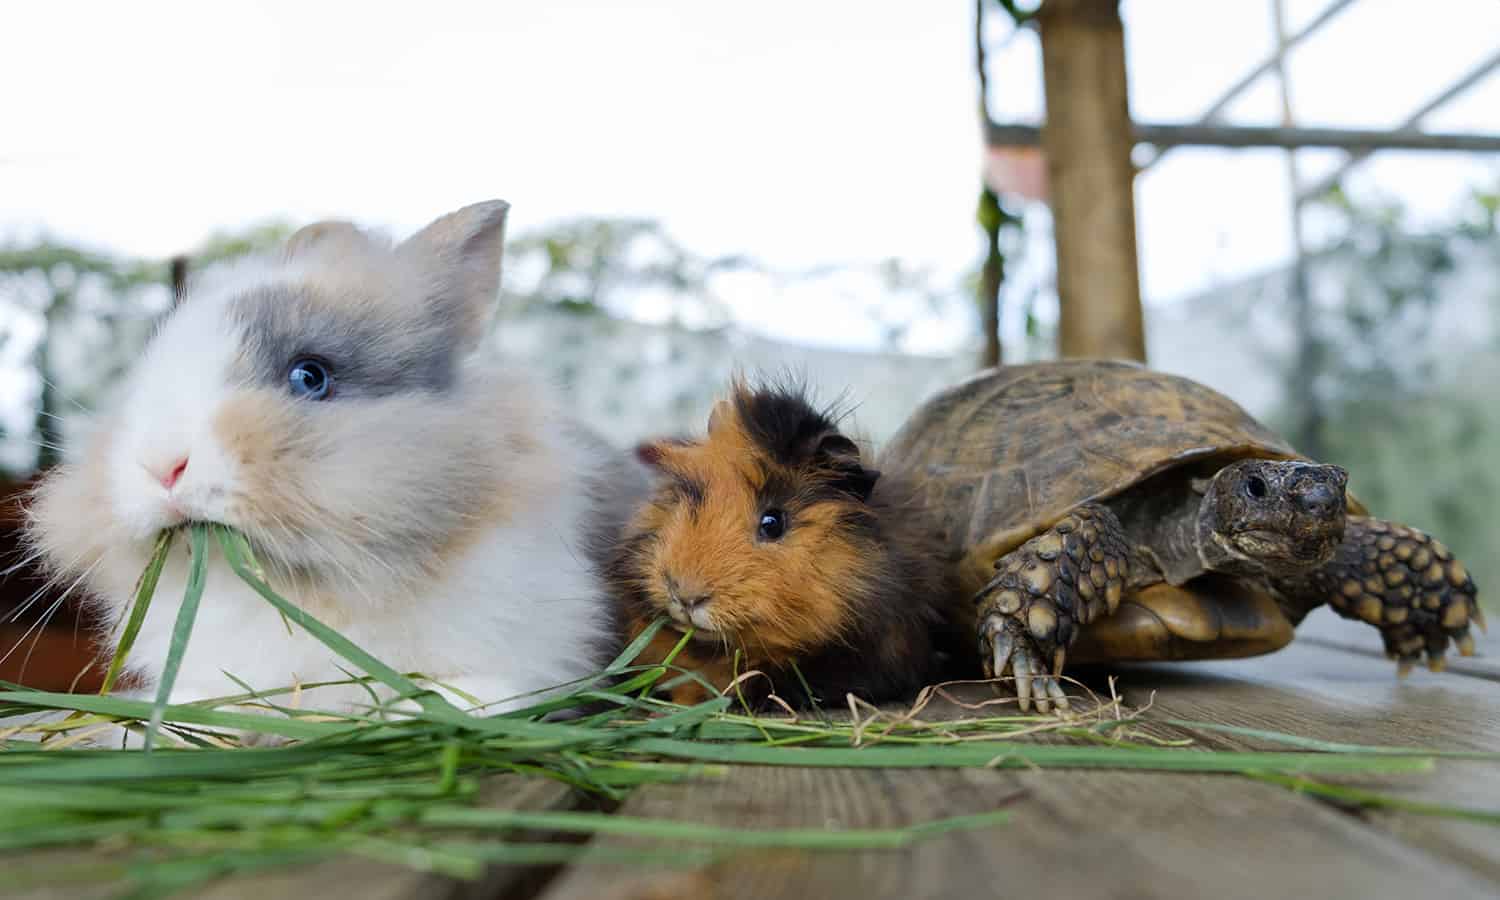 Guinea pigs and a turtle